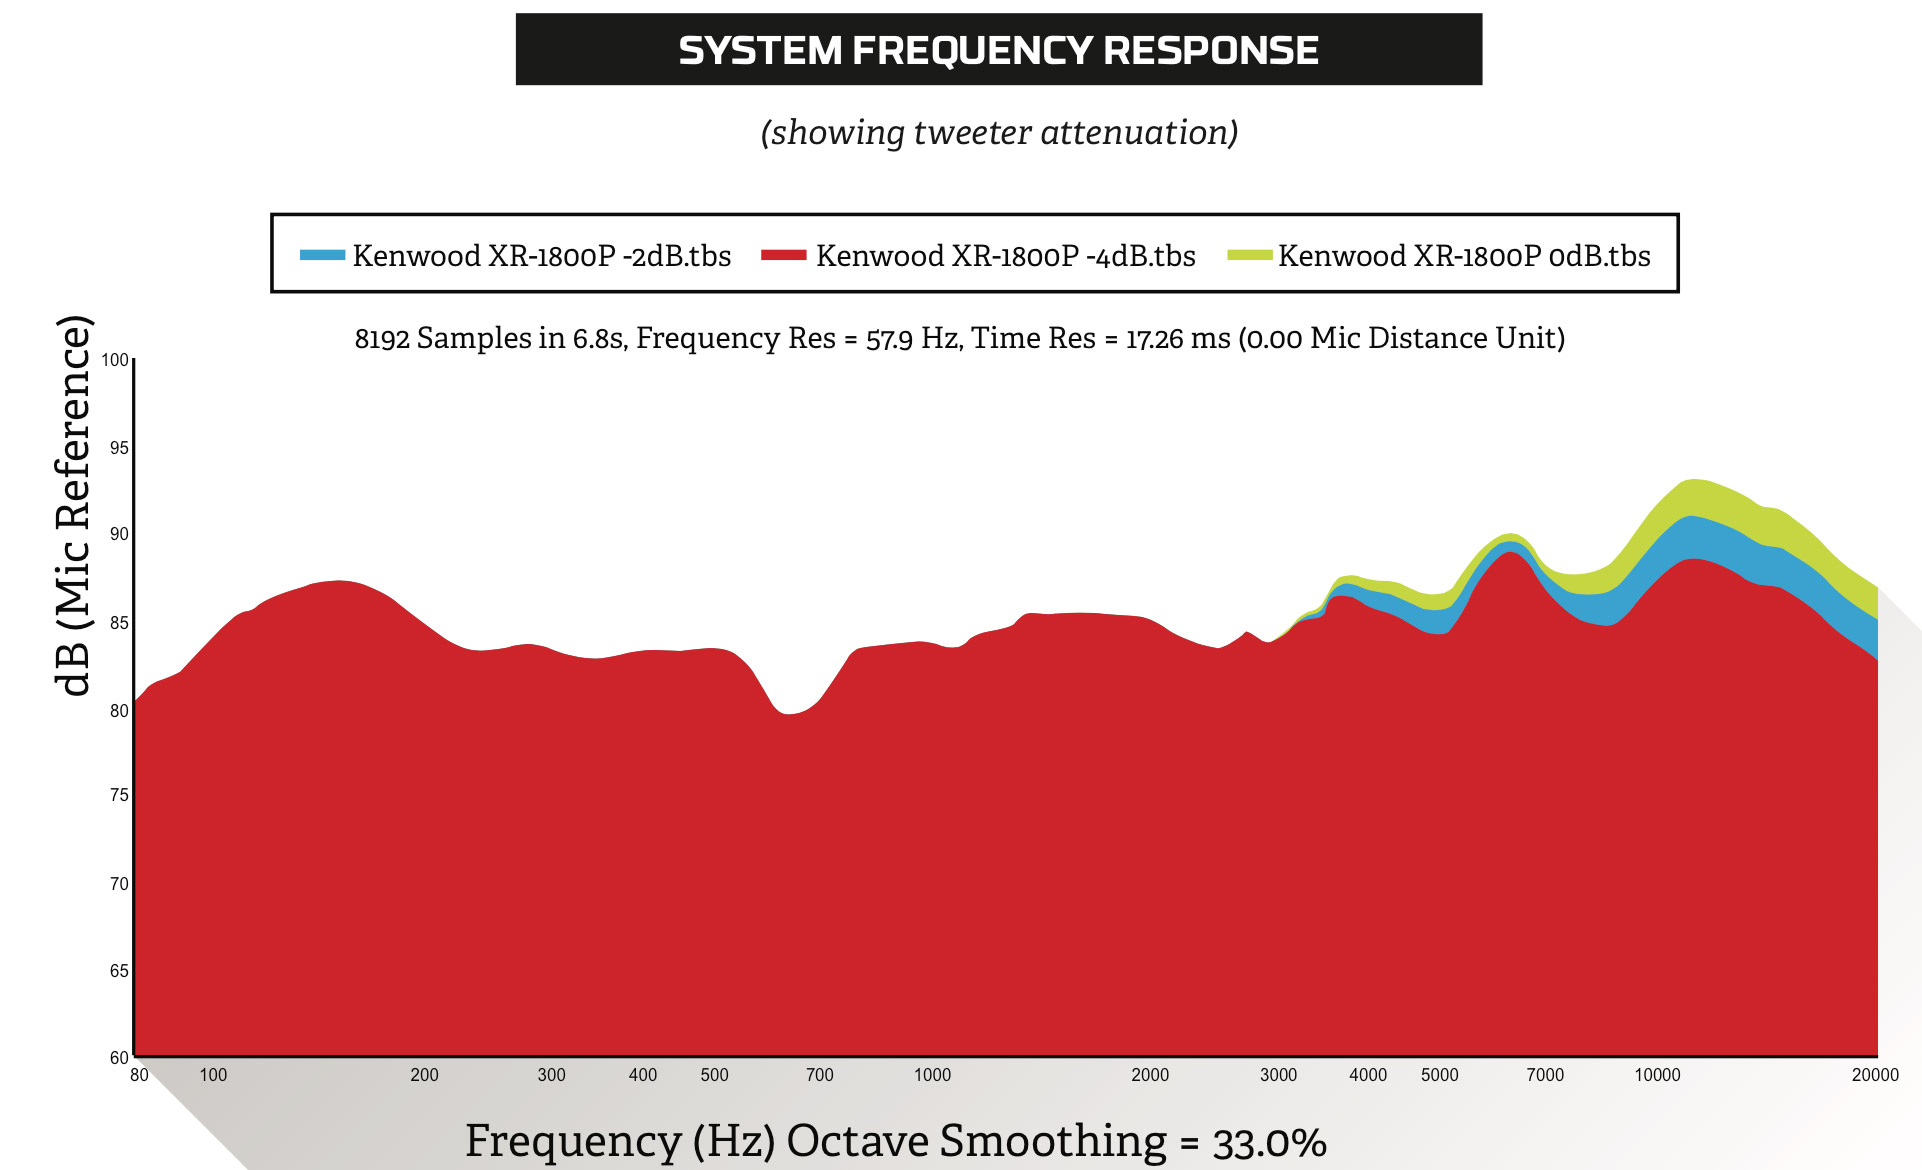 Kenwood XR-1800P: System Frequency Response